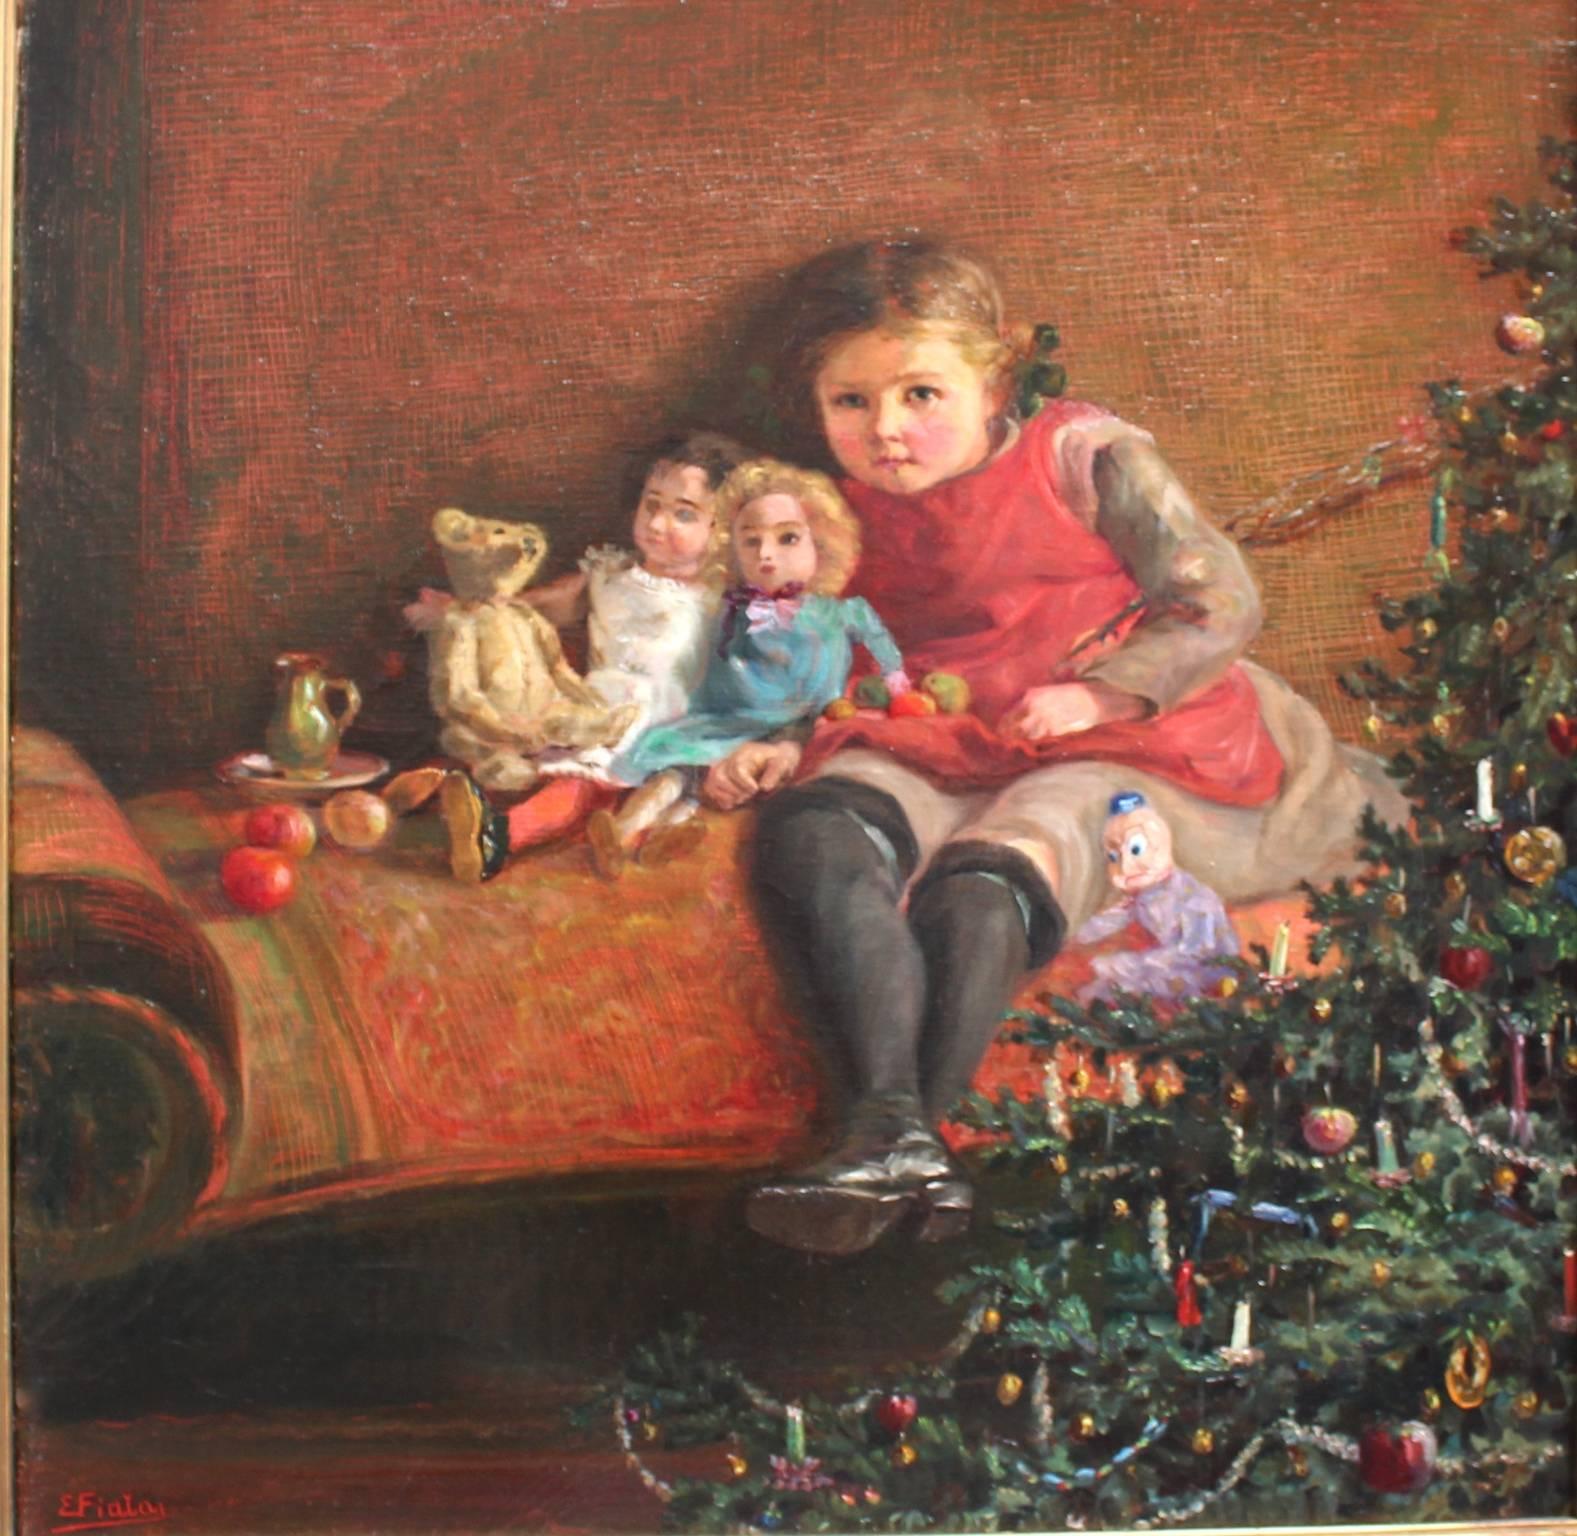 The motif shows the daughter of the artist named Renerl with her dolls sitting under the Christmas tree.
At the corner the christmas tree was been decorated with littles candles and sweatmeat.
Oil on canvas
The artist Emil Fiala (1869 Moravia-1960